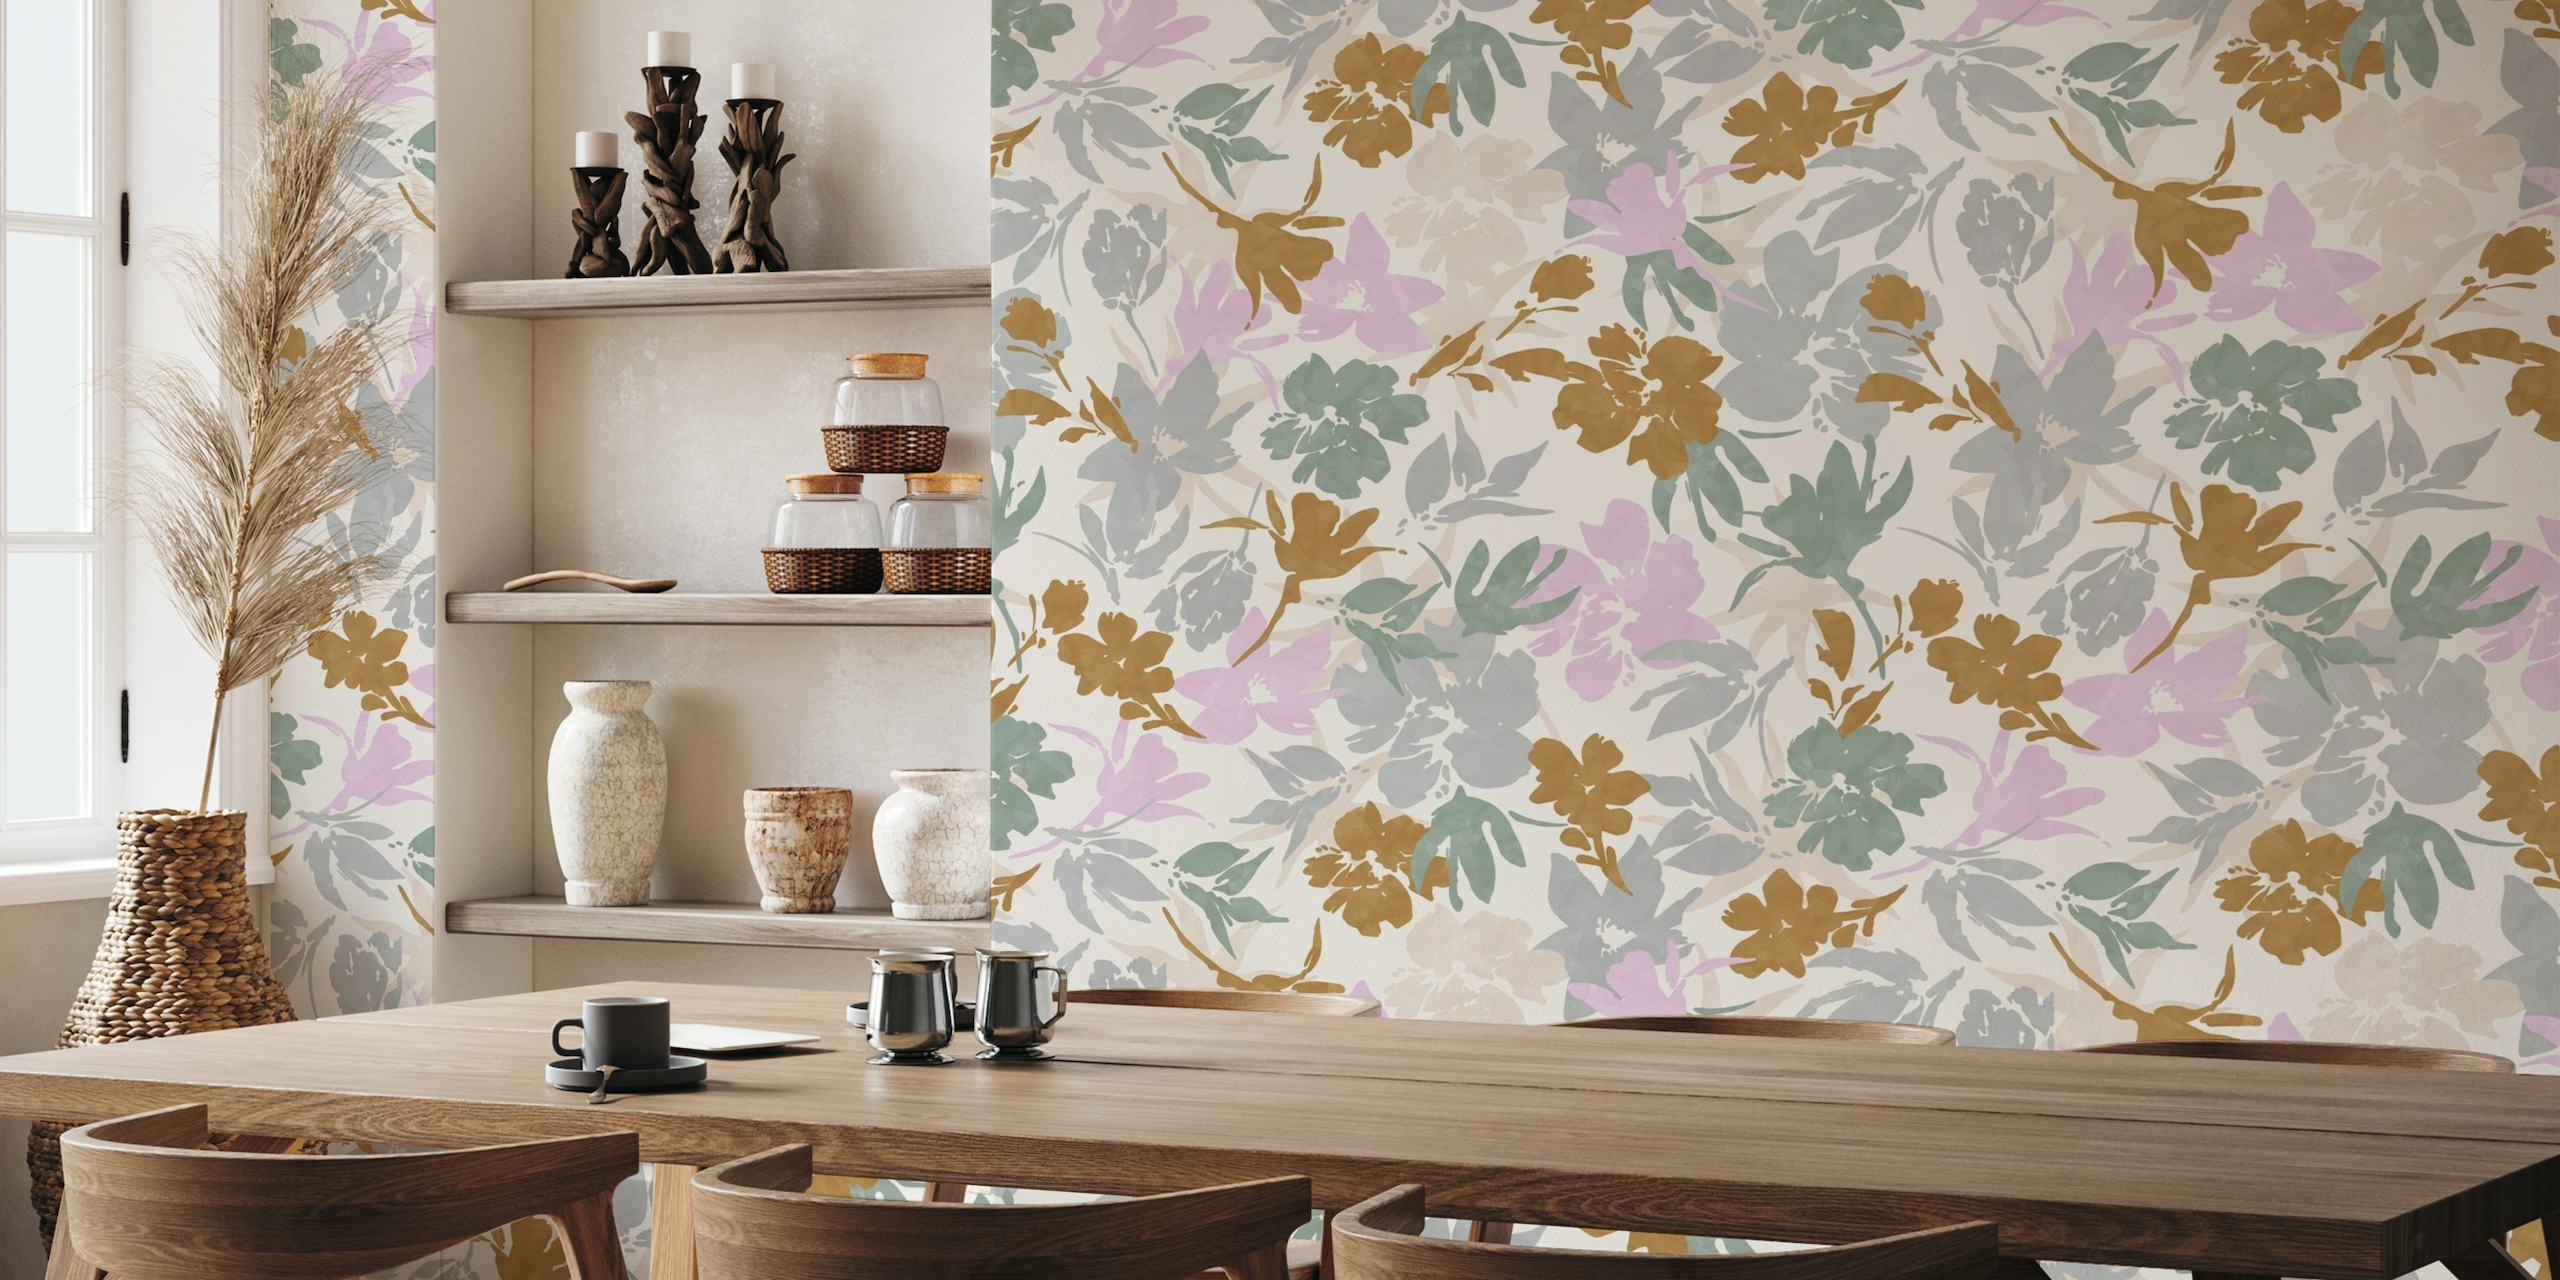 Pastel-colored wall mural featuring a tranquil meadow with delicate floral patterns